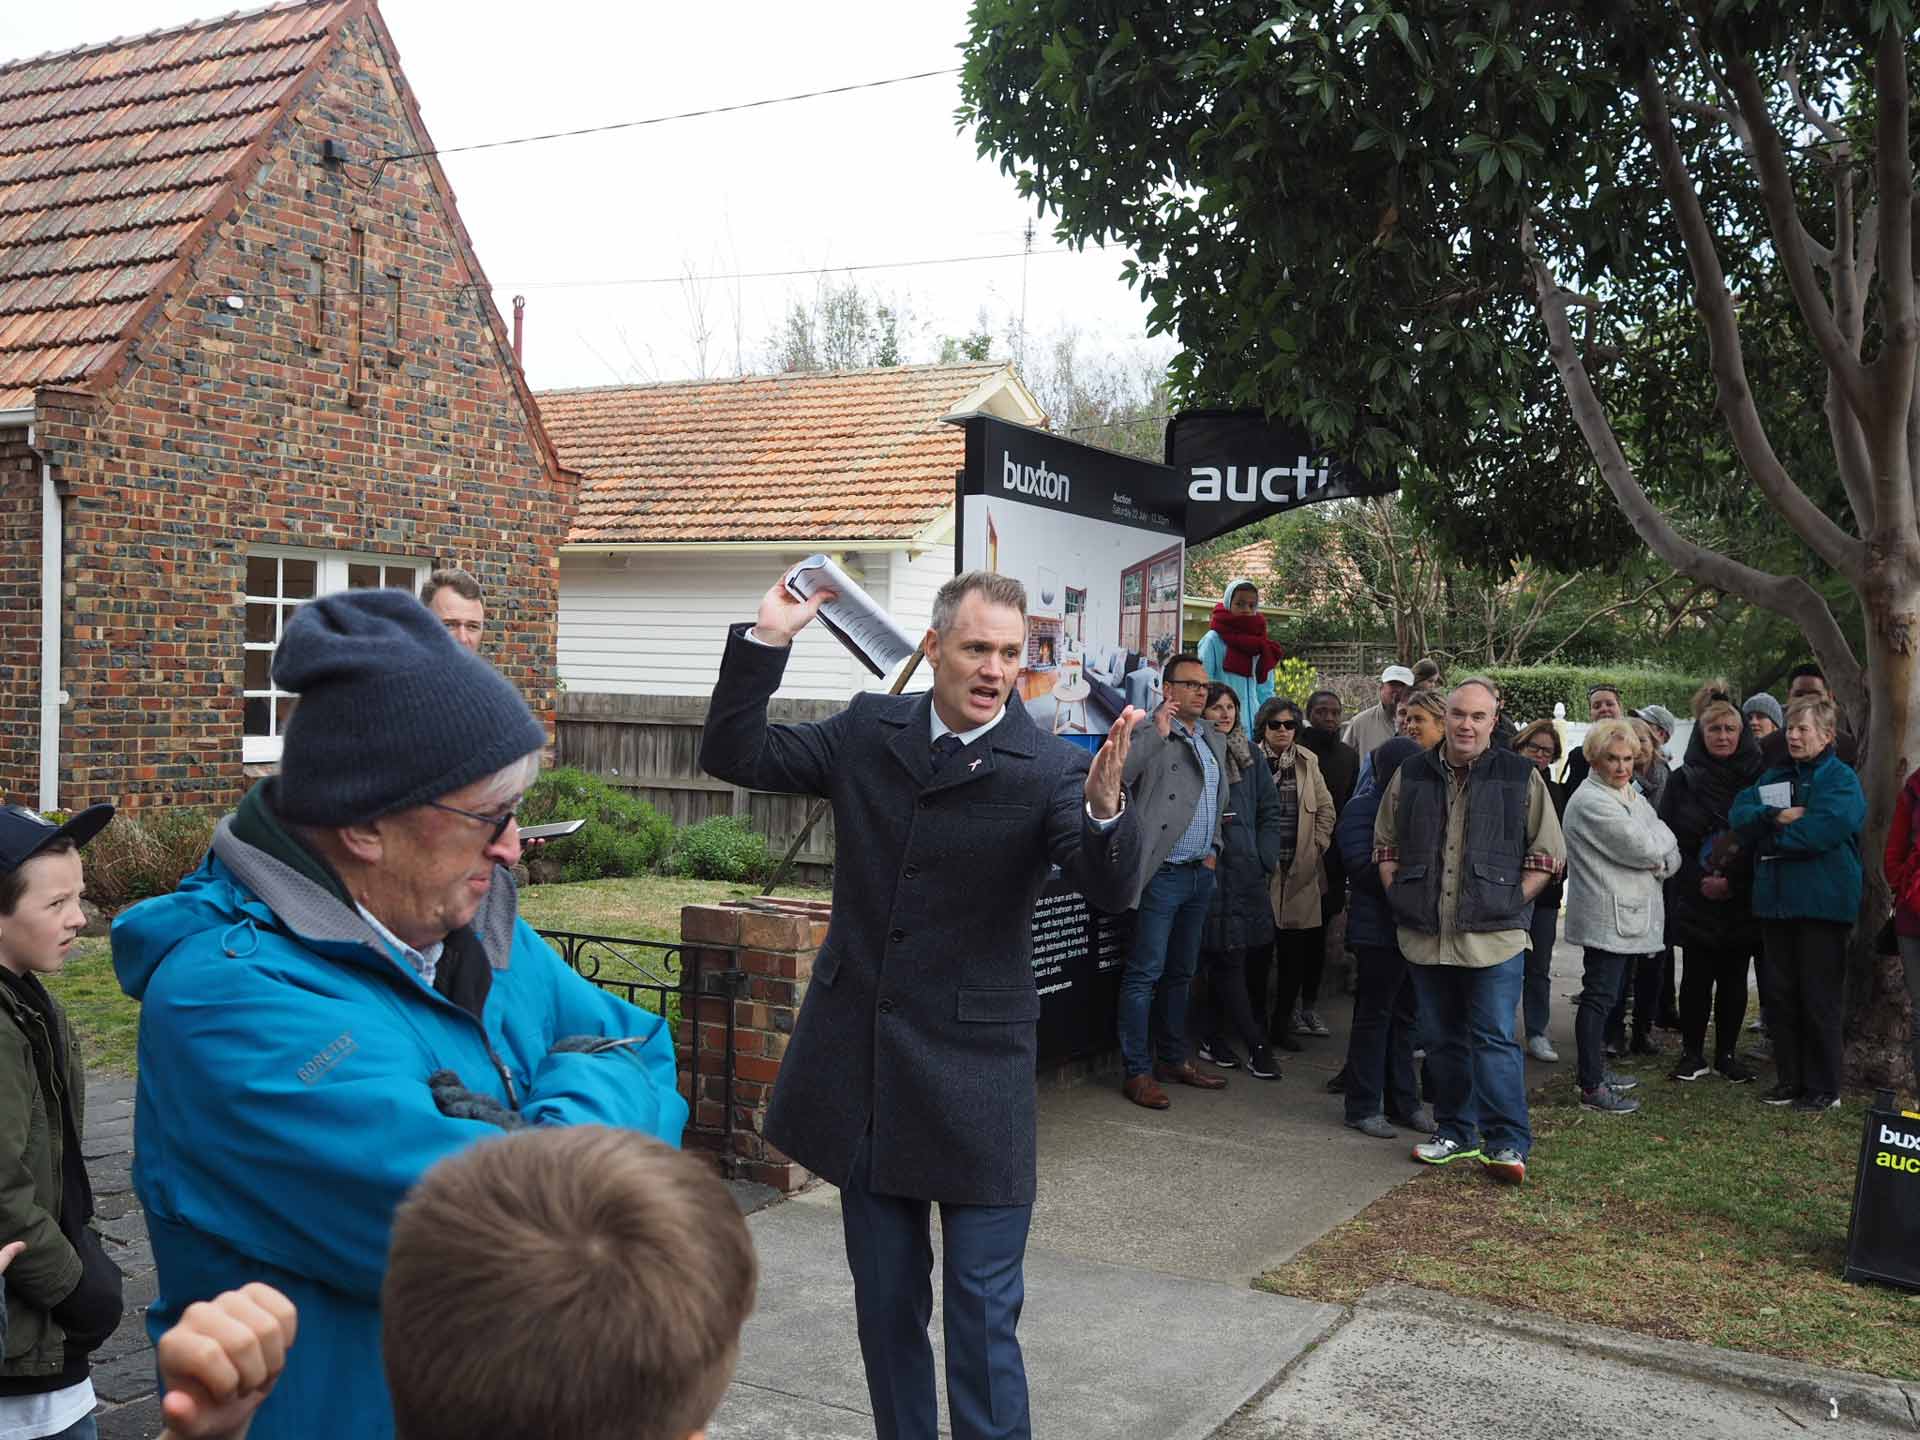 Auction snapshot - Auctioneer calling auction in front of brown brick house